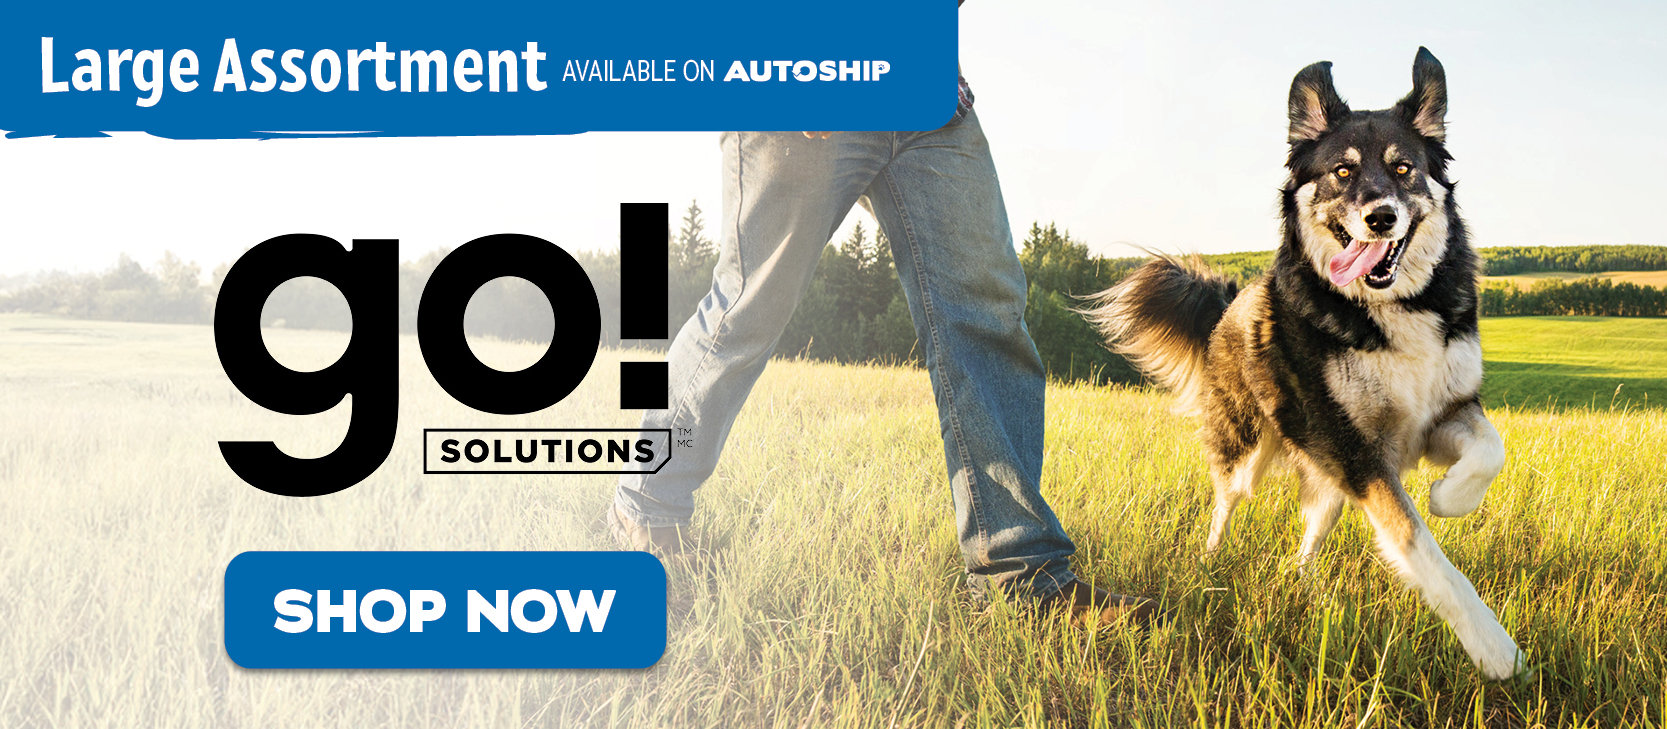 Go! Solutions - A large assortment available on autoship